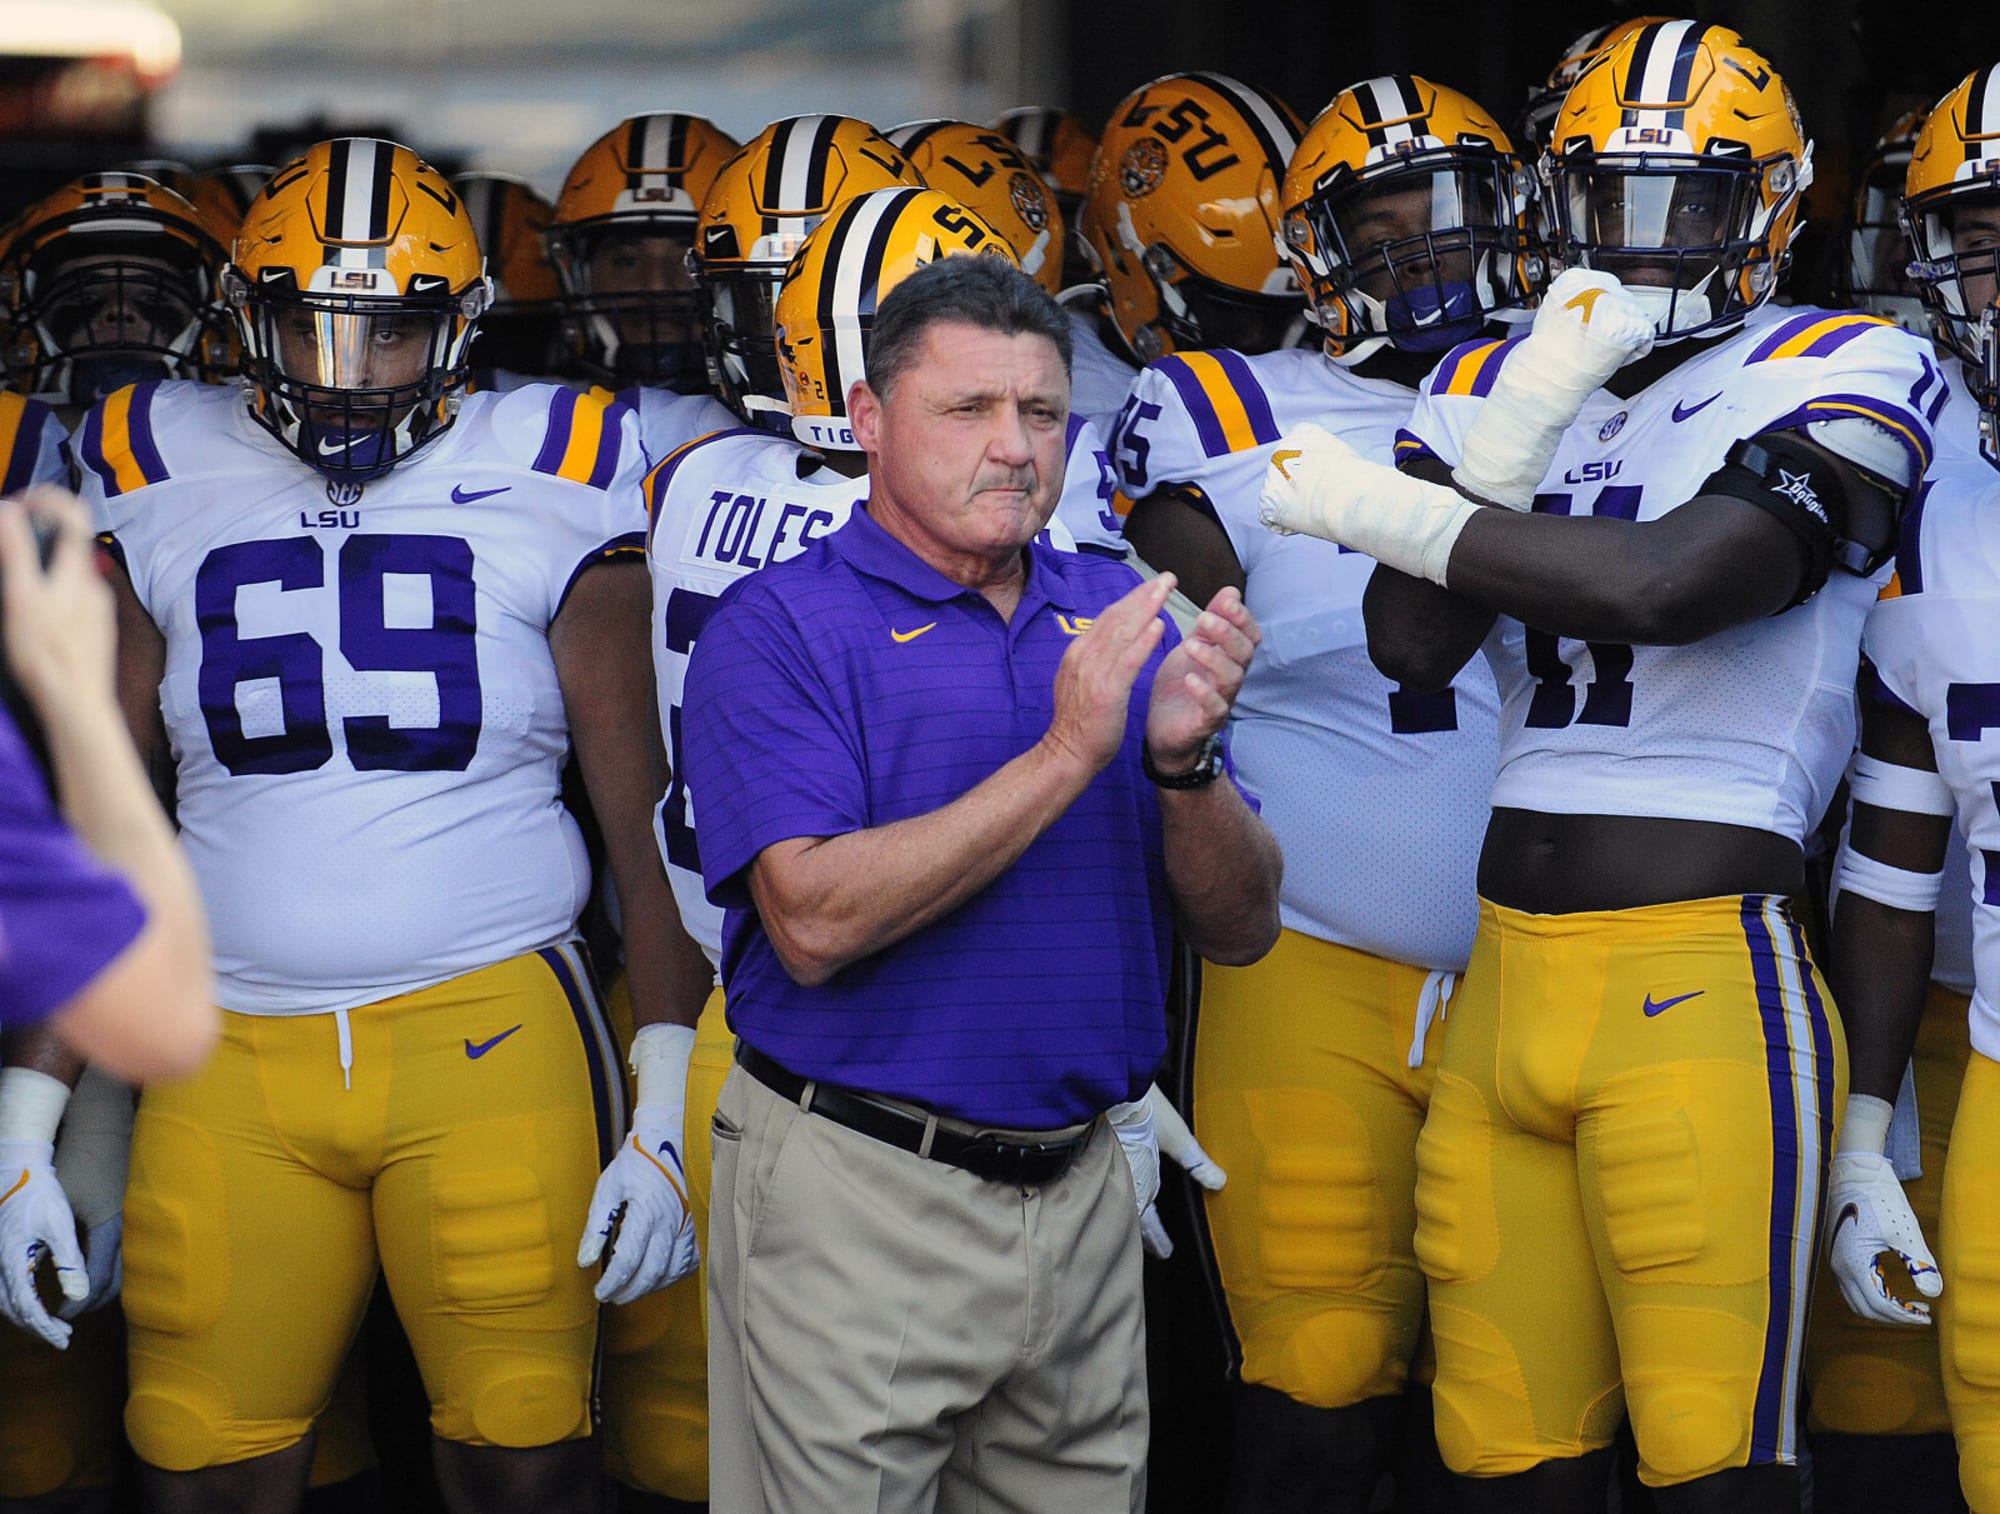 Lsu 2022 Football Schedule 2022 Lsu Football Schedule: Complete List Of Tigers Games